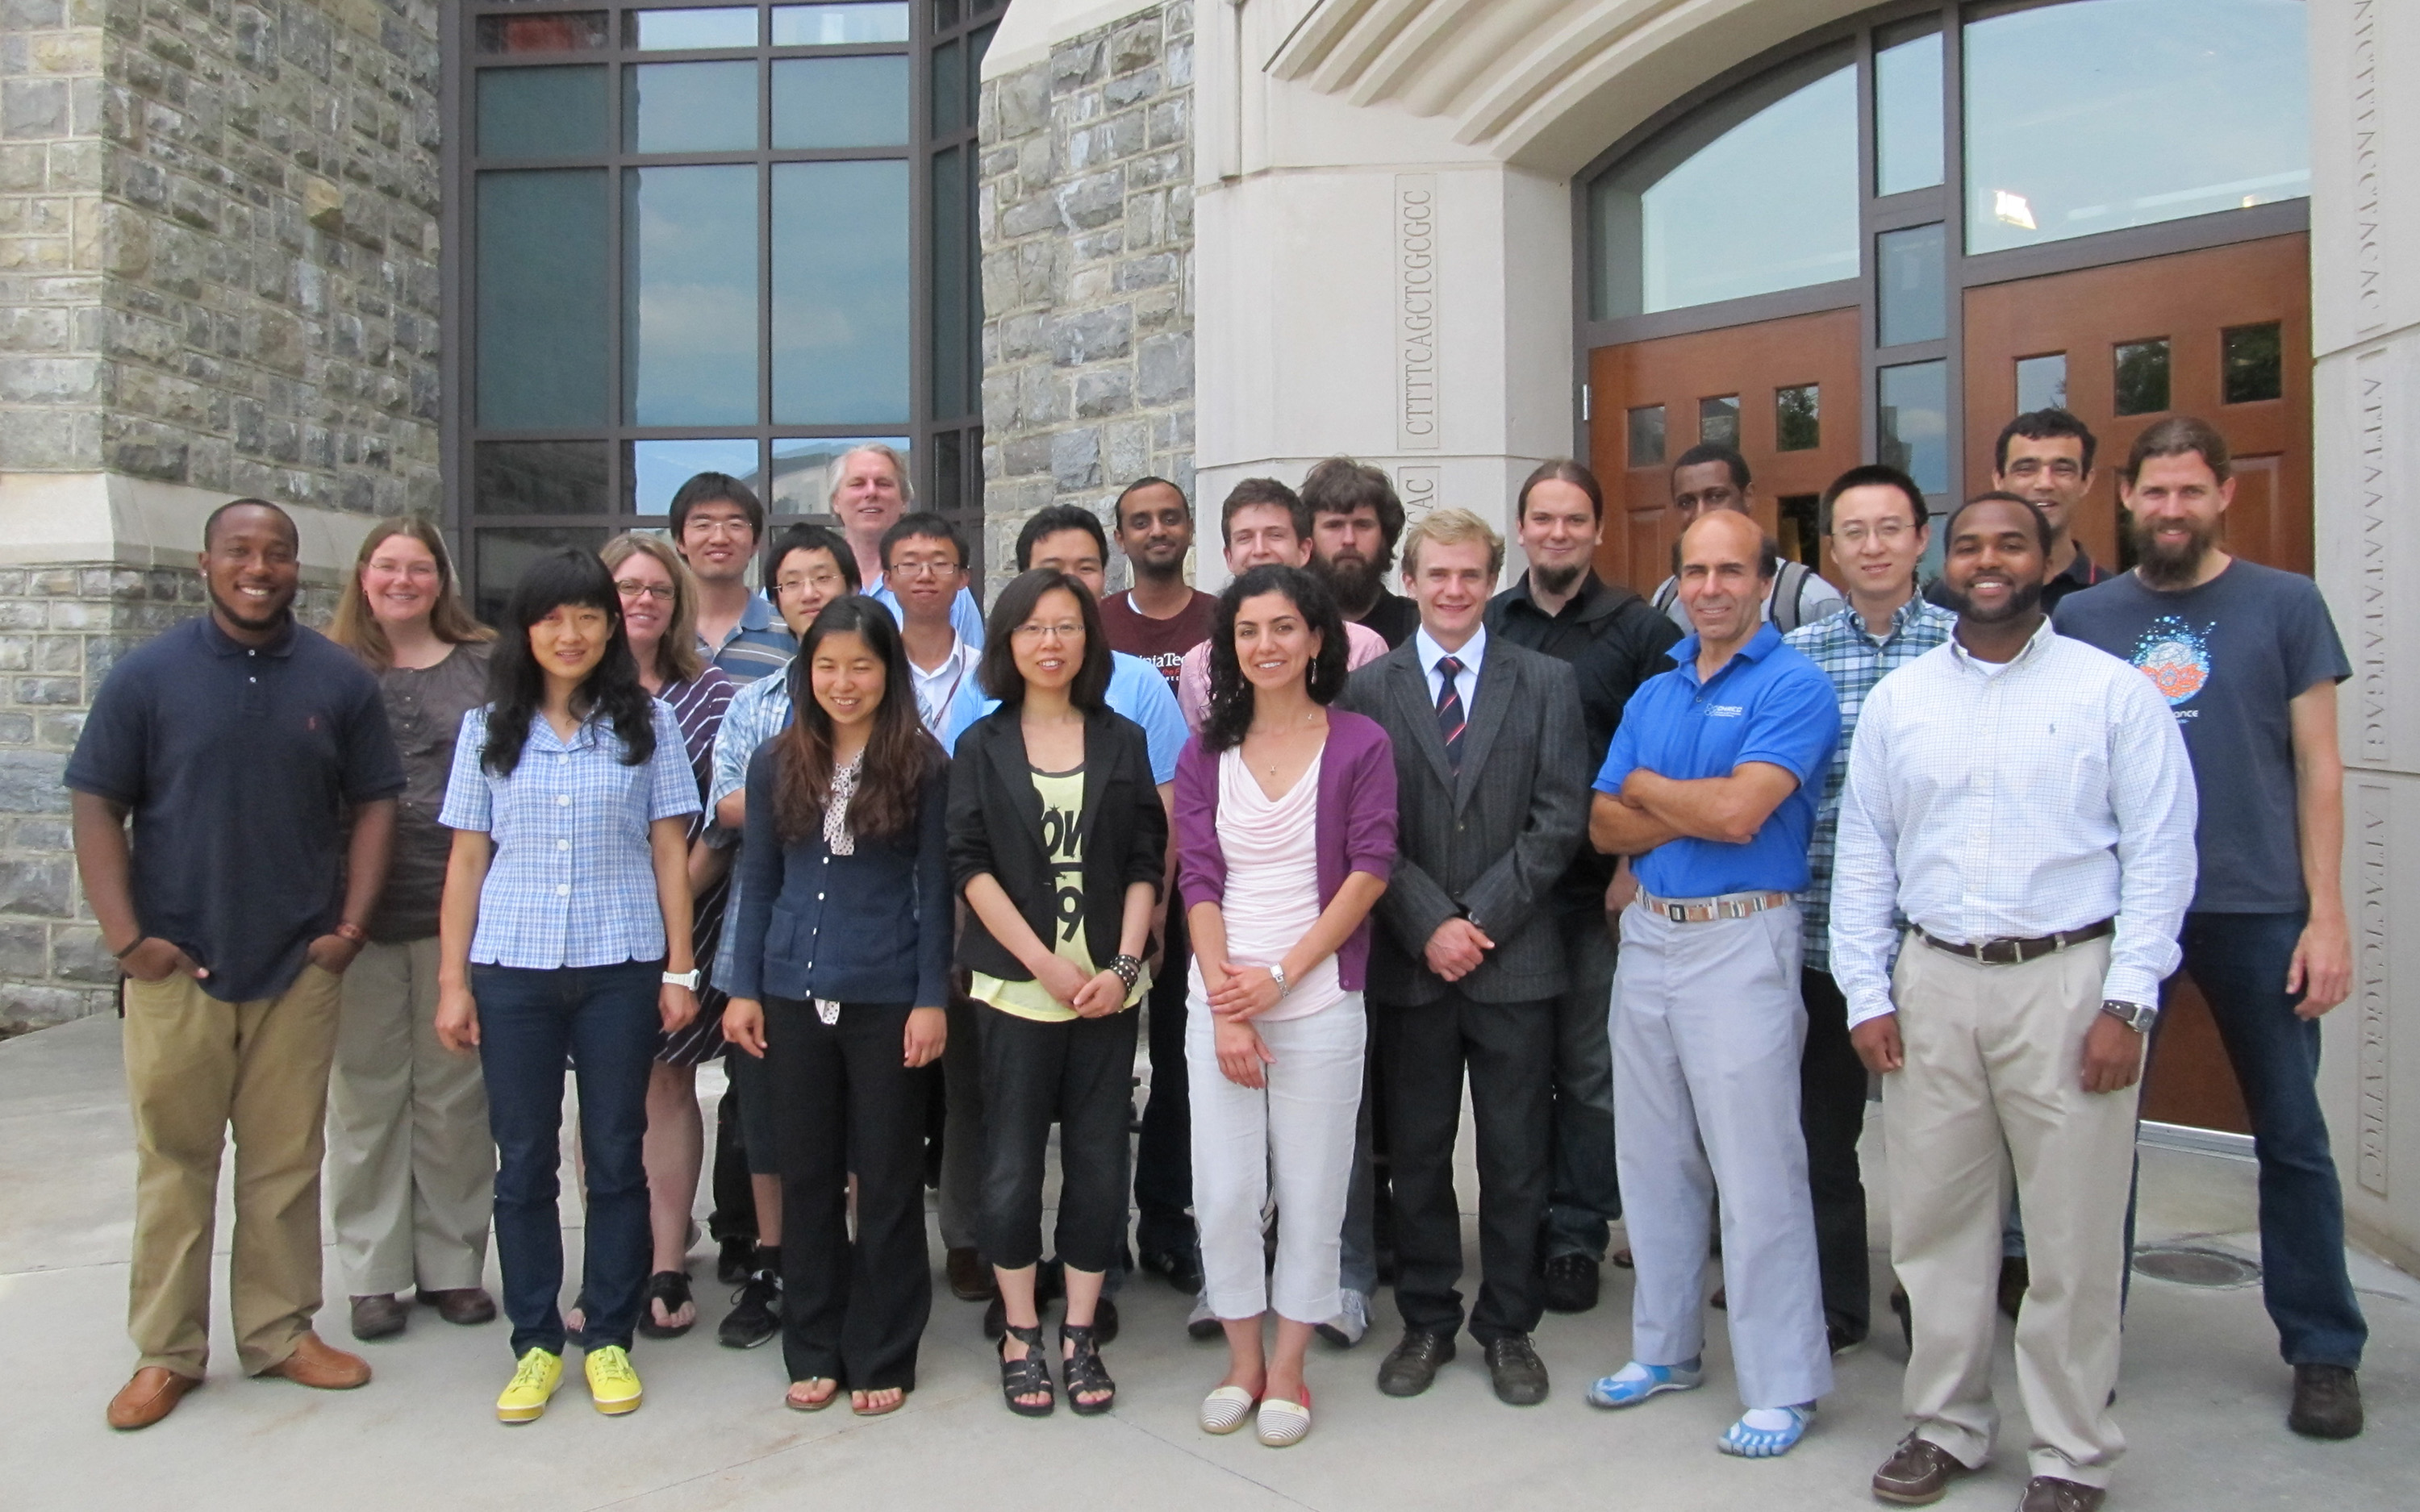 Pictured are students and mentors of the summer institute.